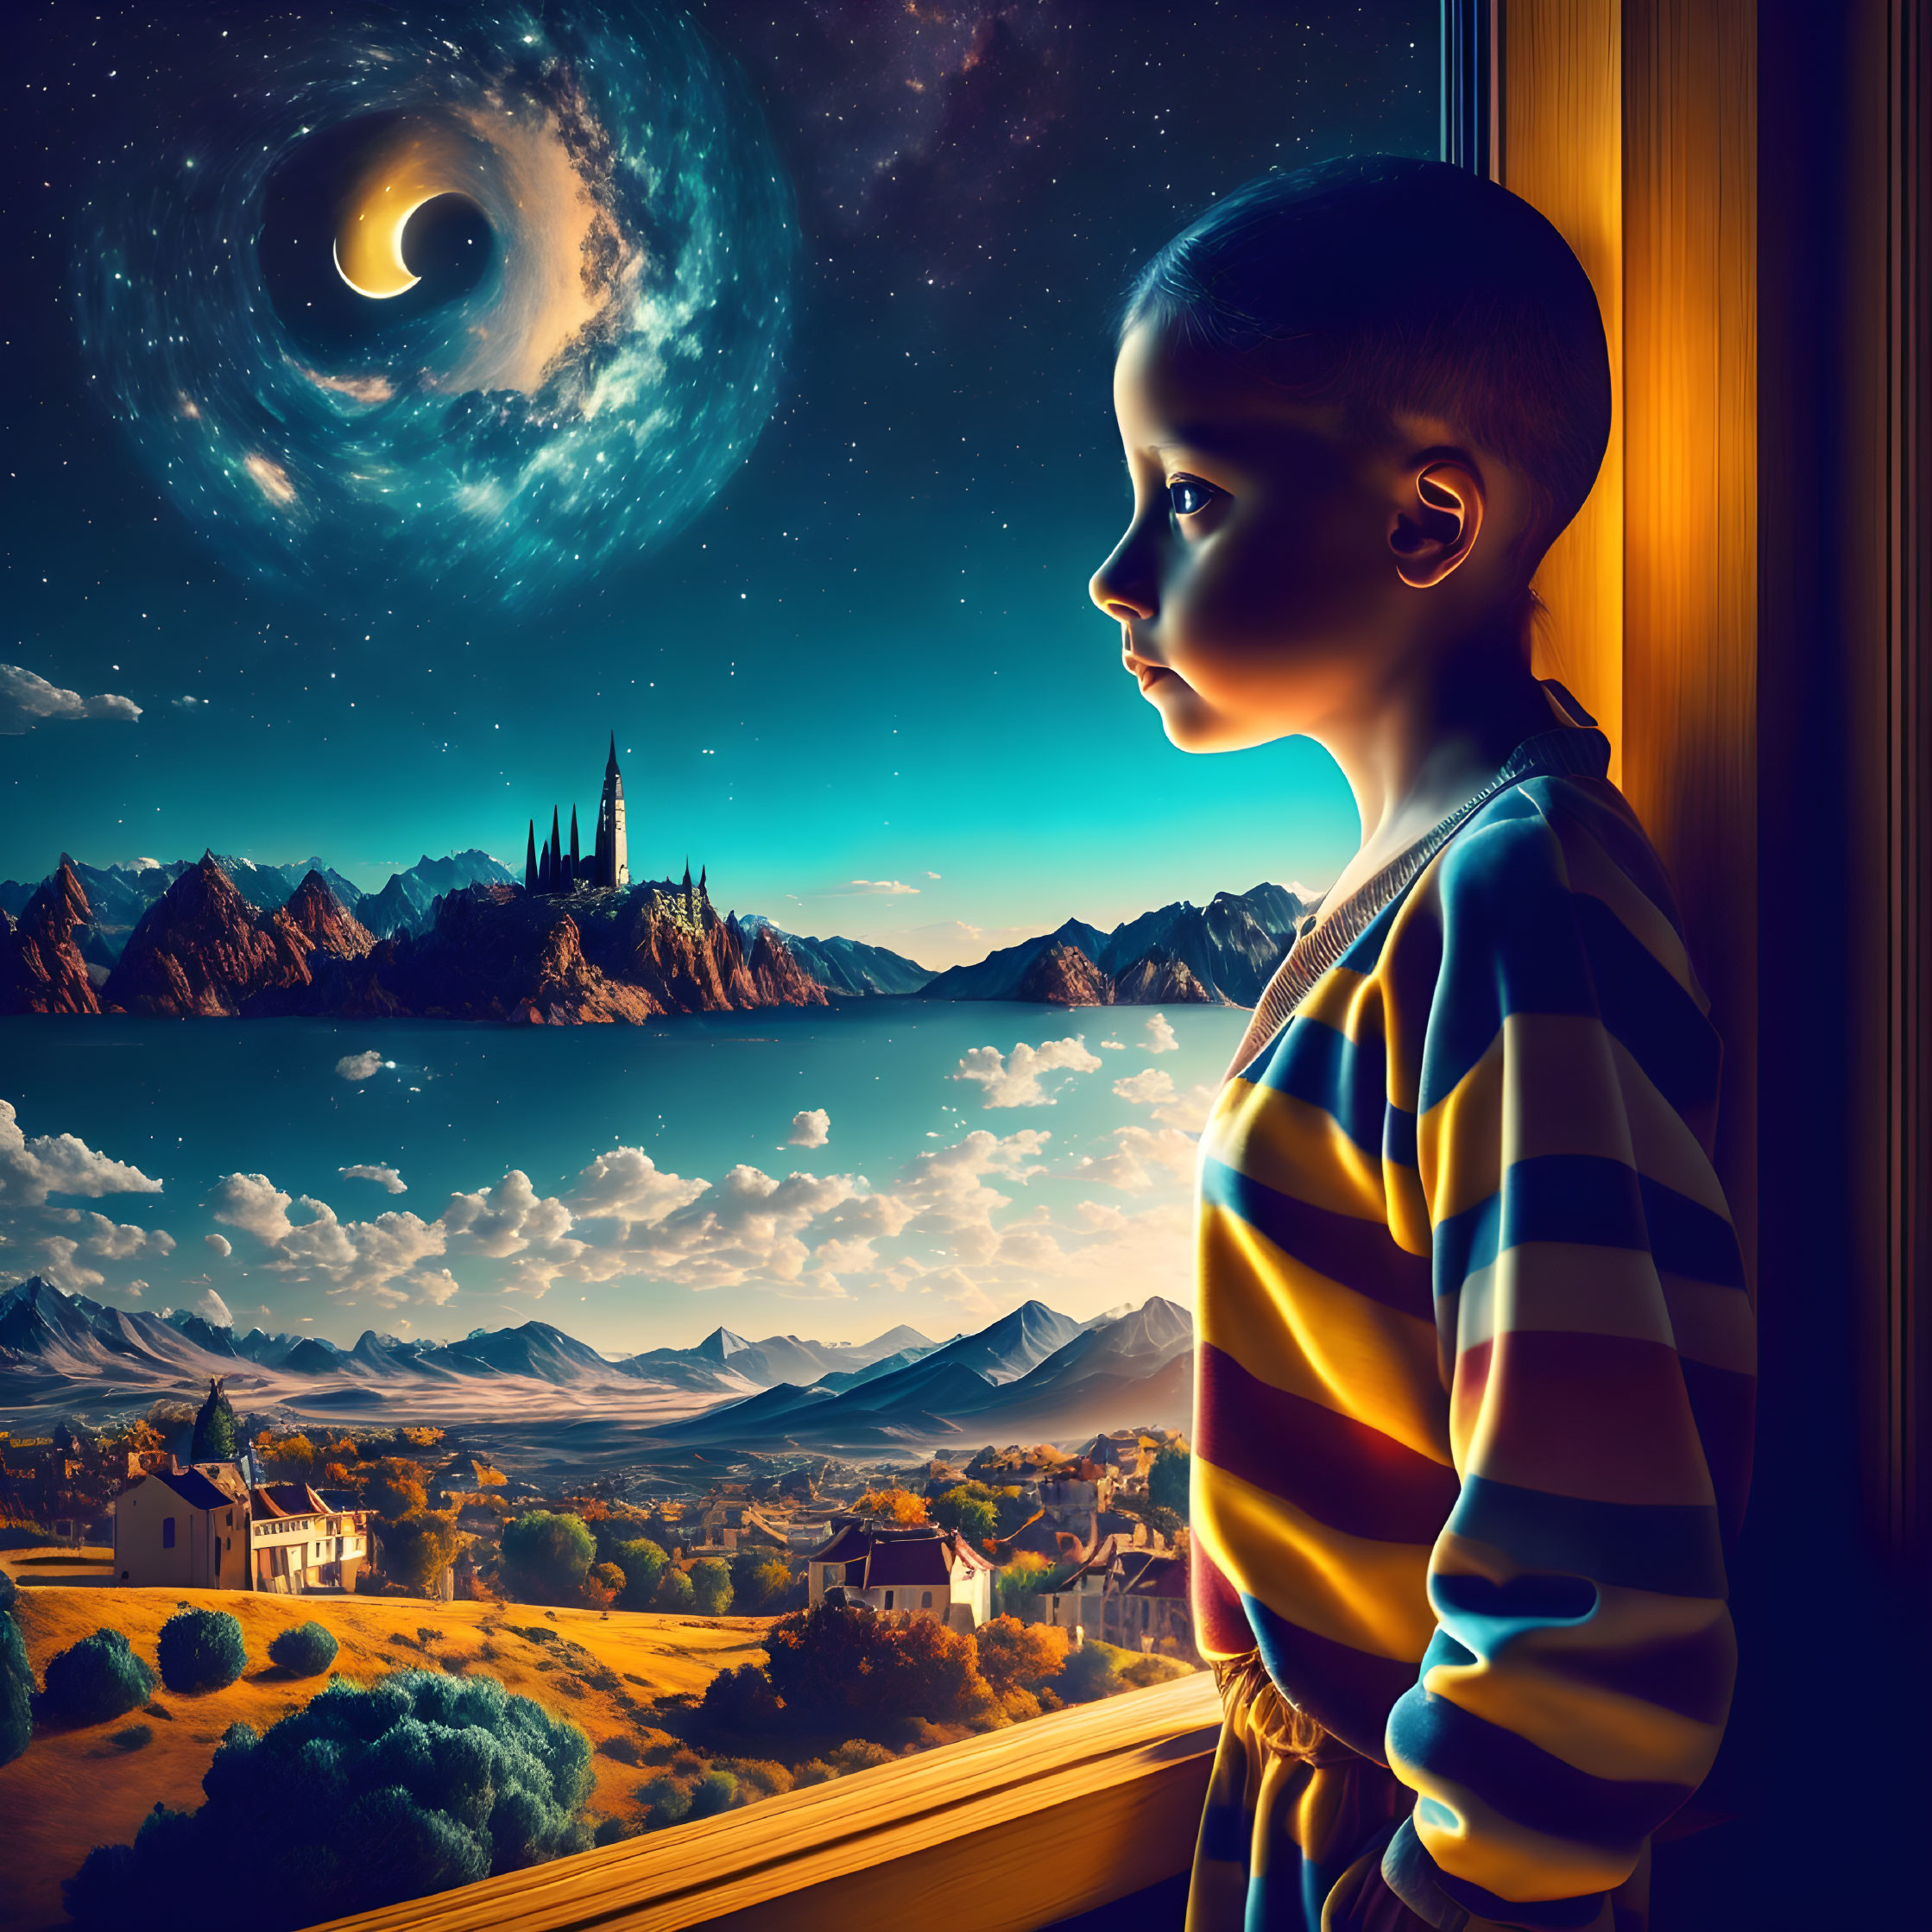 Child in Striped Shirt Looks at Surreal Night Sky Over Fantasy Landscape